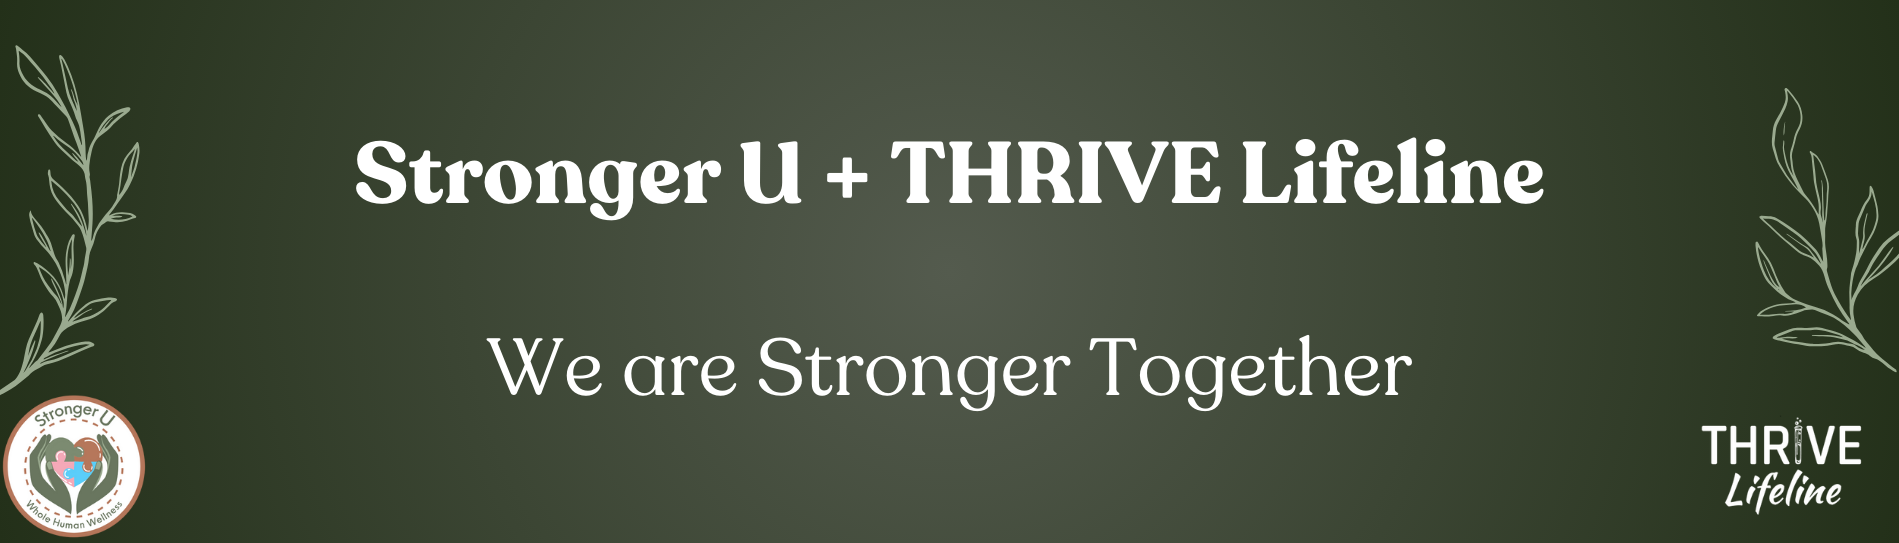 Text reads Stronger U plus THRIVE Lifeline. 
Their respective logos are in the corners. Background is dark green gradient. 
On the left and right sides are light green outlines of leaves on a stick.